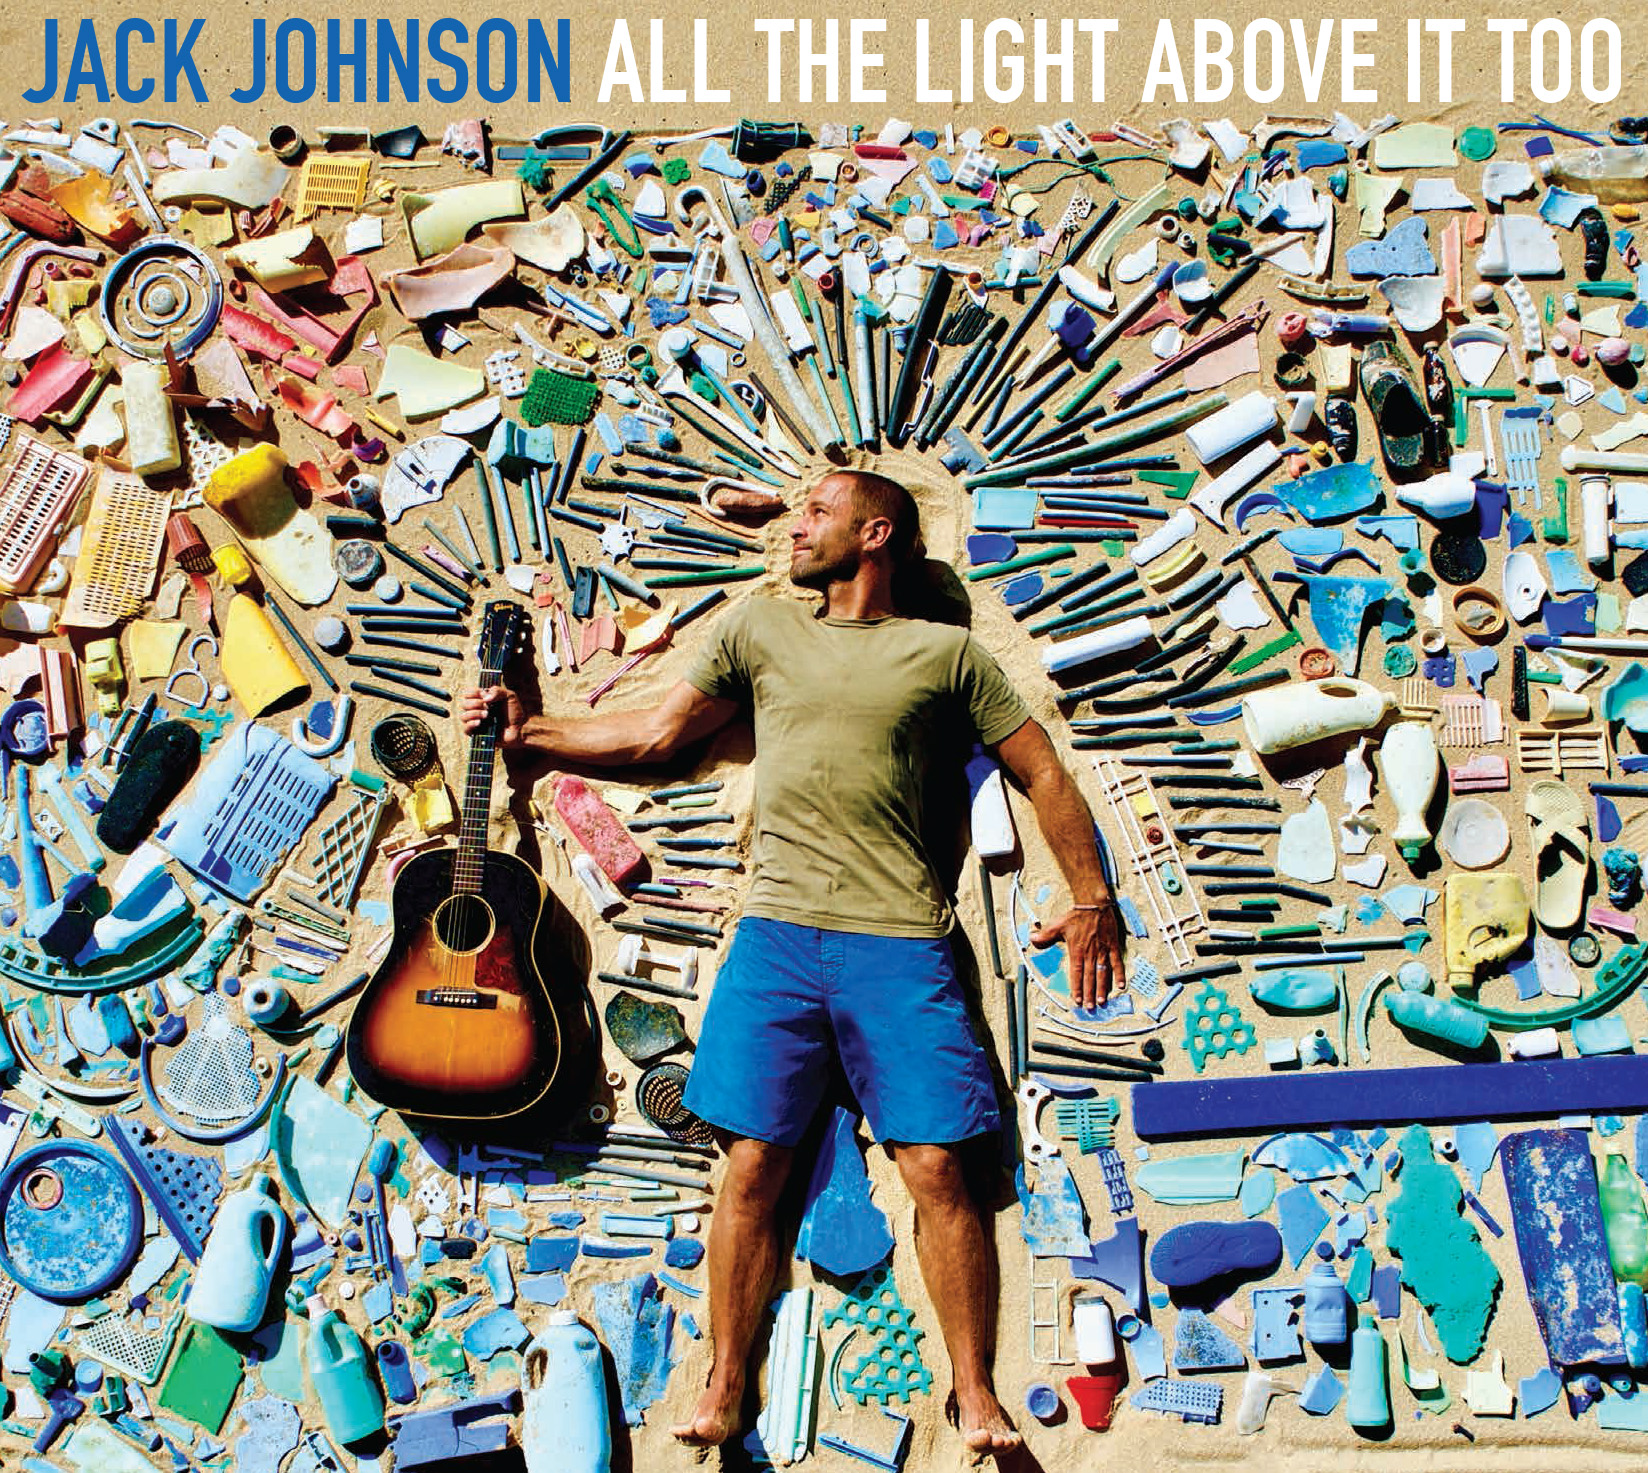 Jack Johnson album artwork for All The Light Above It Too. Photo provided by: Brushfire Records